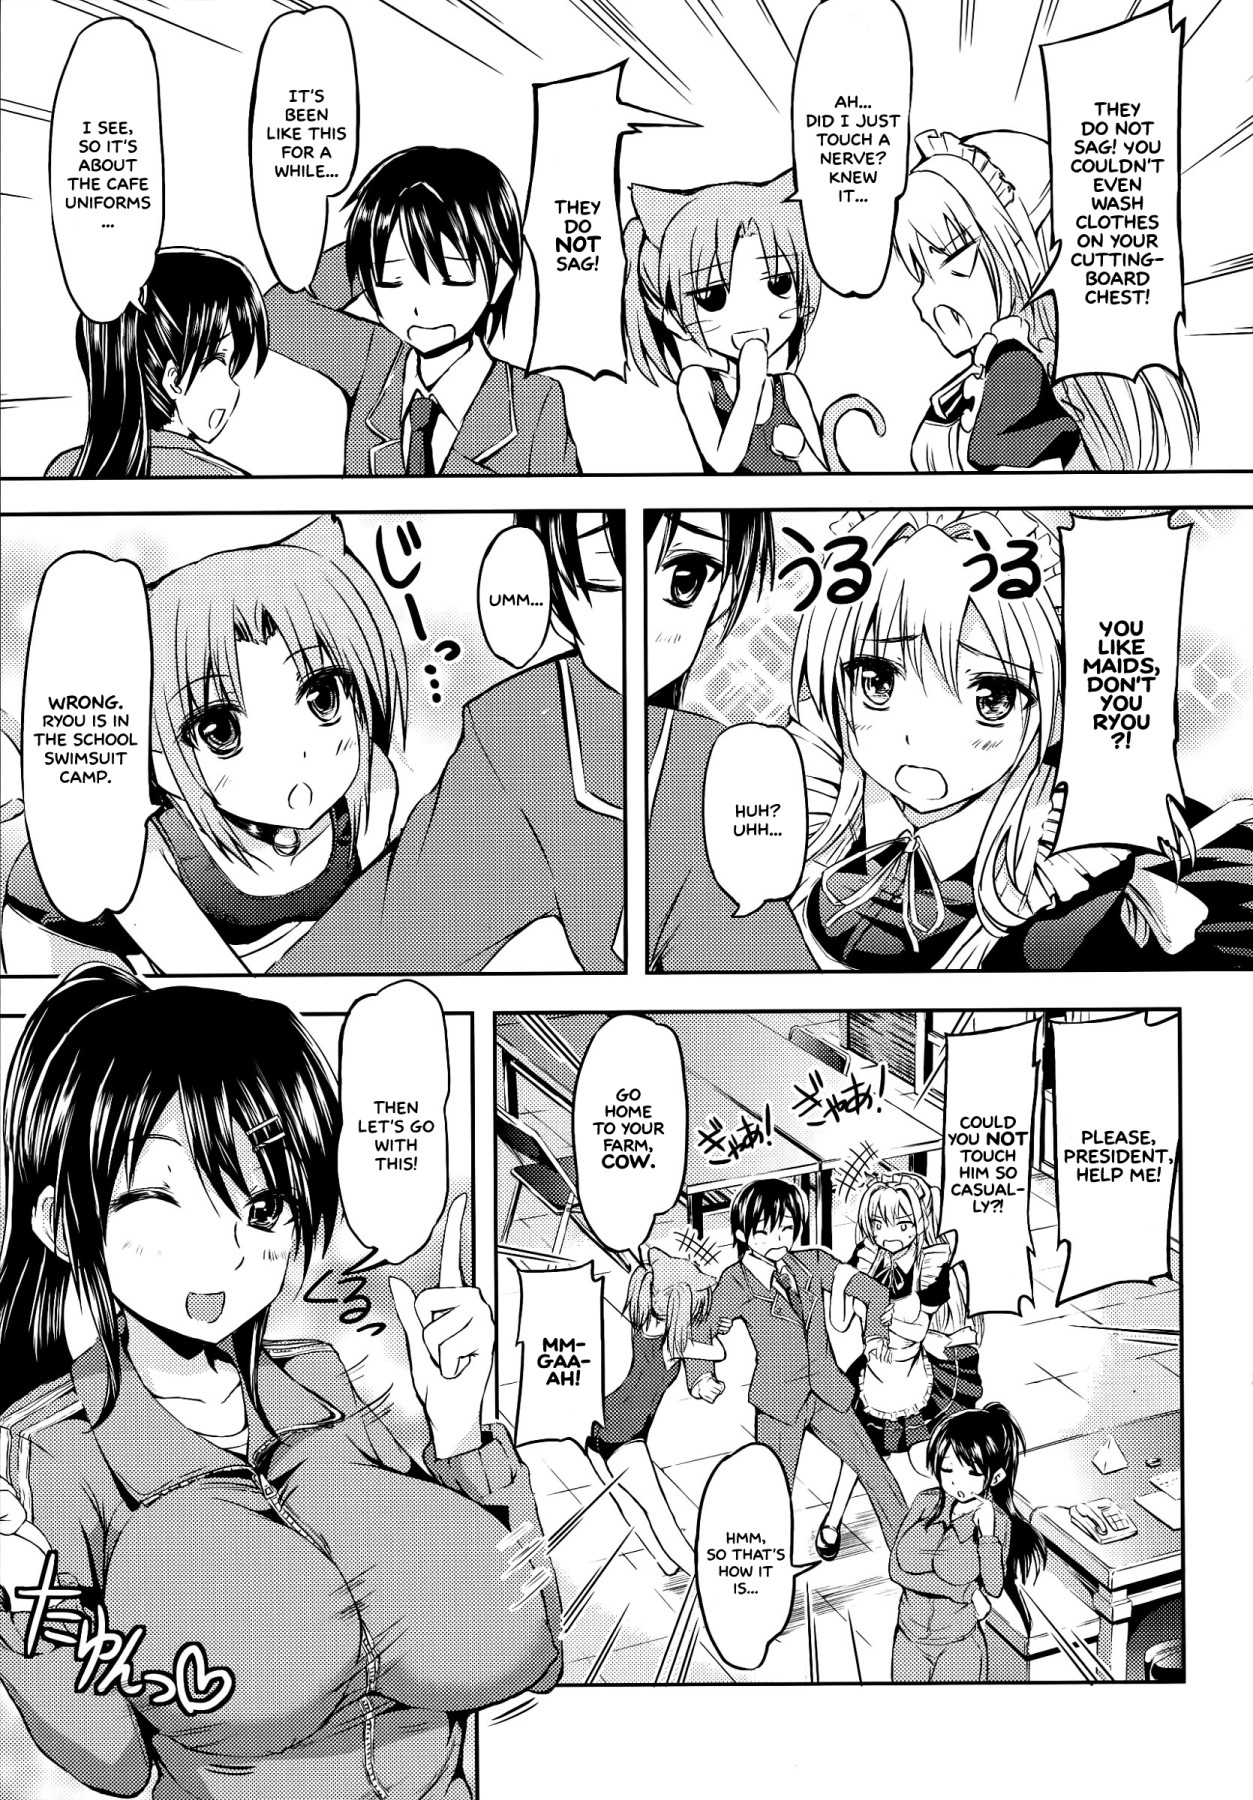 Hentai Manga Comic-The Young Lady's Maid Situation-Chapter 7-3